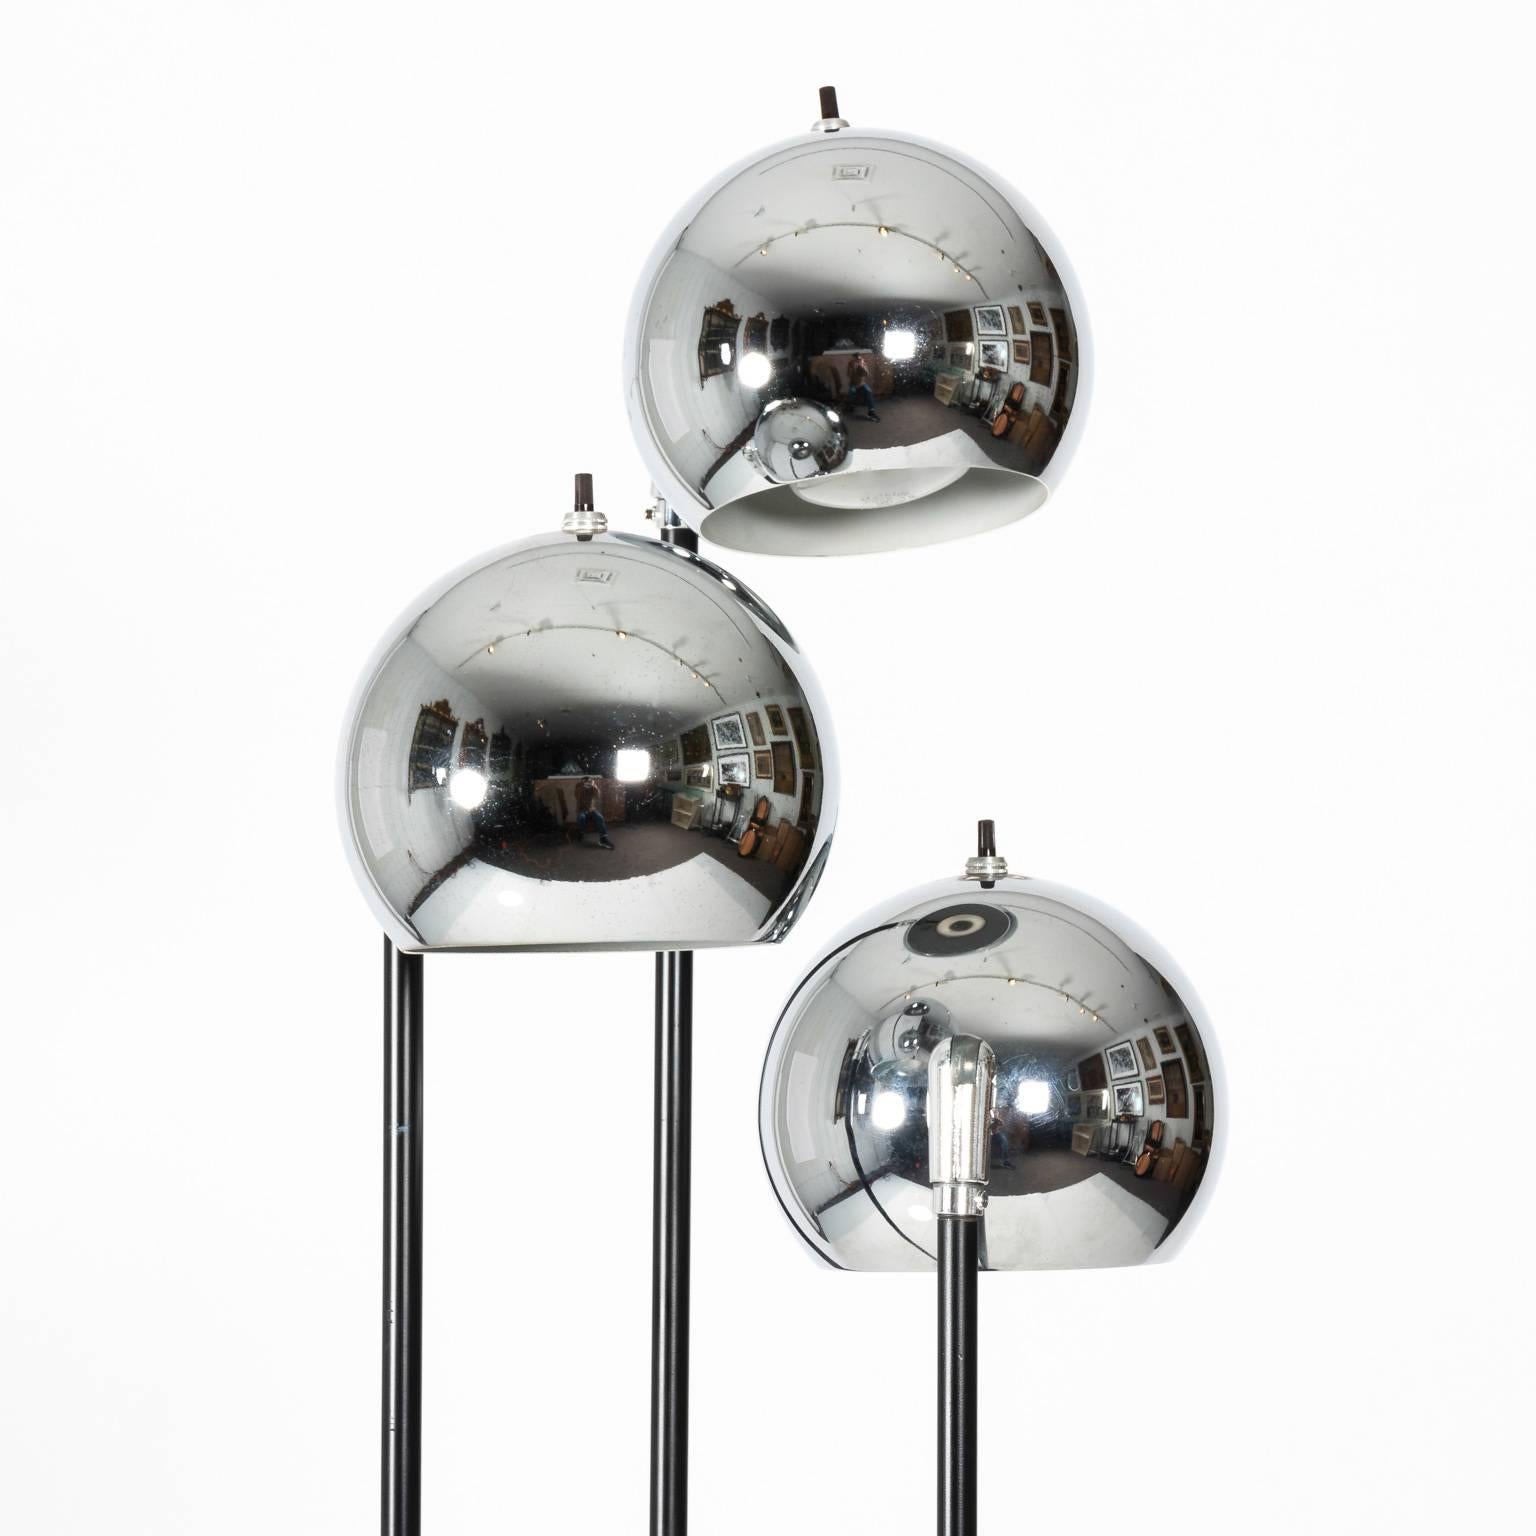  Chrome lamp with 3 heads, a black base, circa 1970. Lamps attributed to Sonneman Lighting.
 